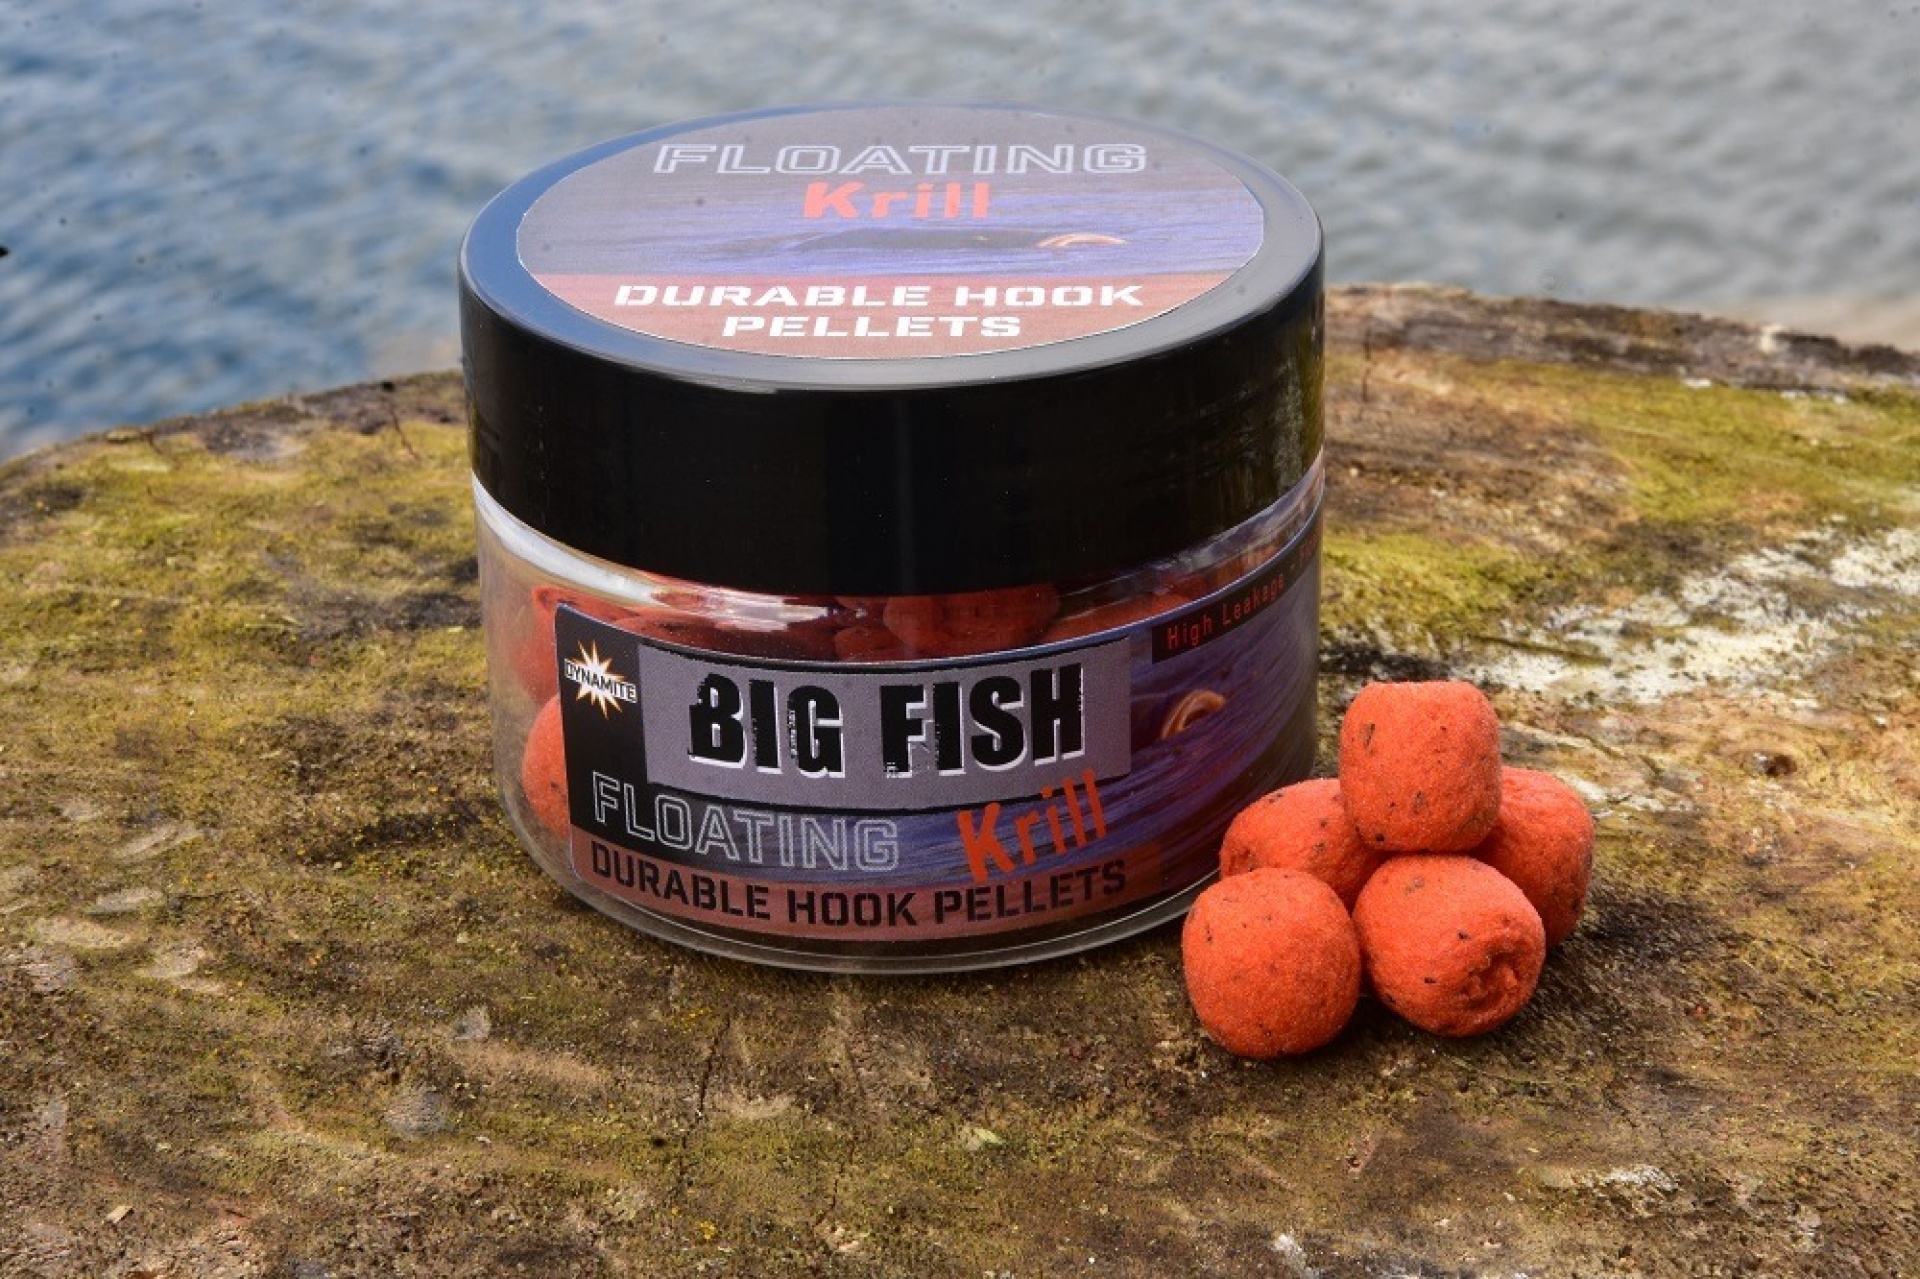 Dynamite Baits Big Fish Floating Durable Hookers - Krill